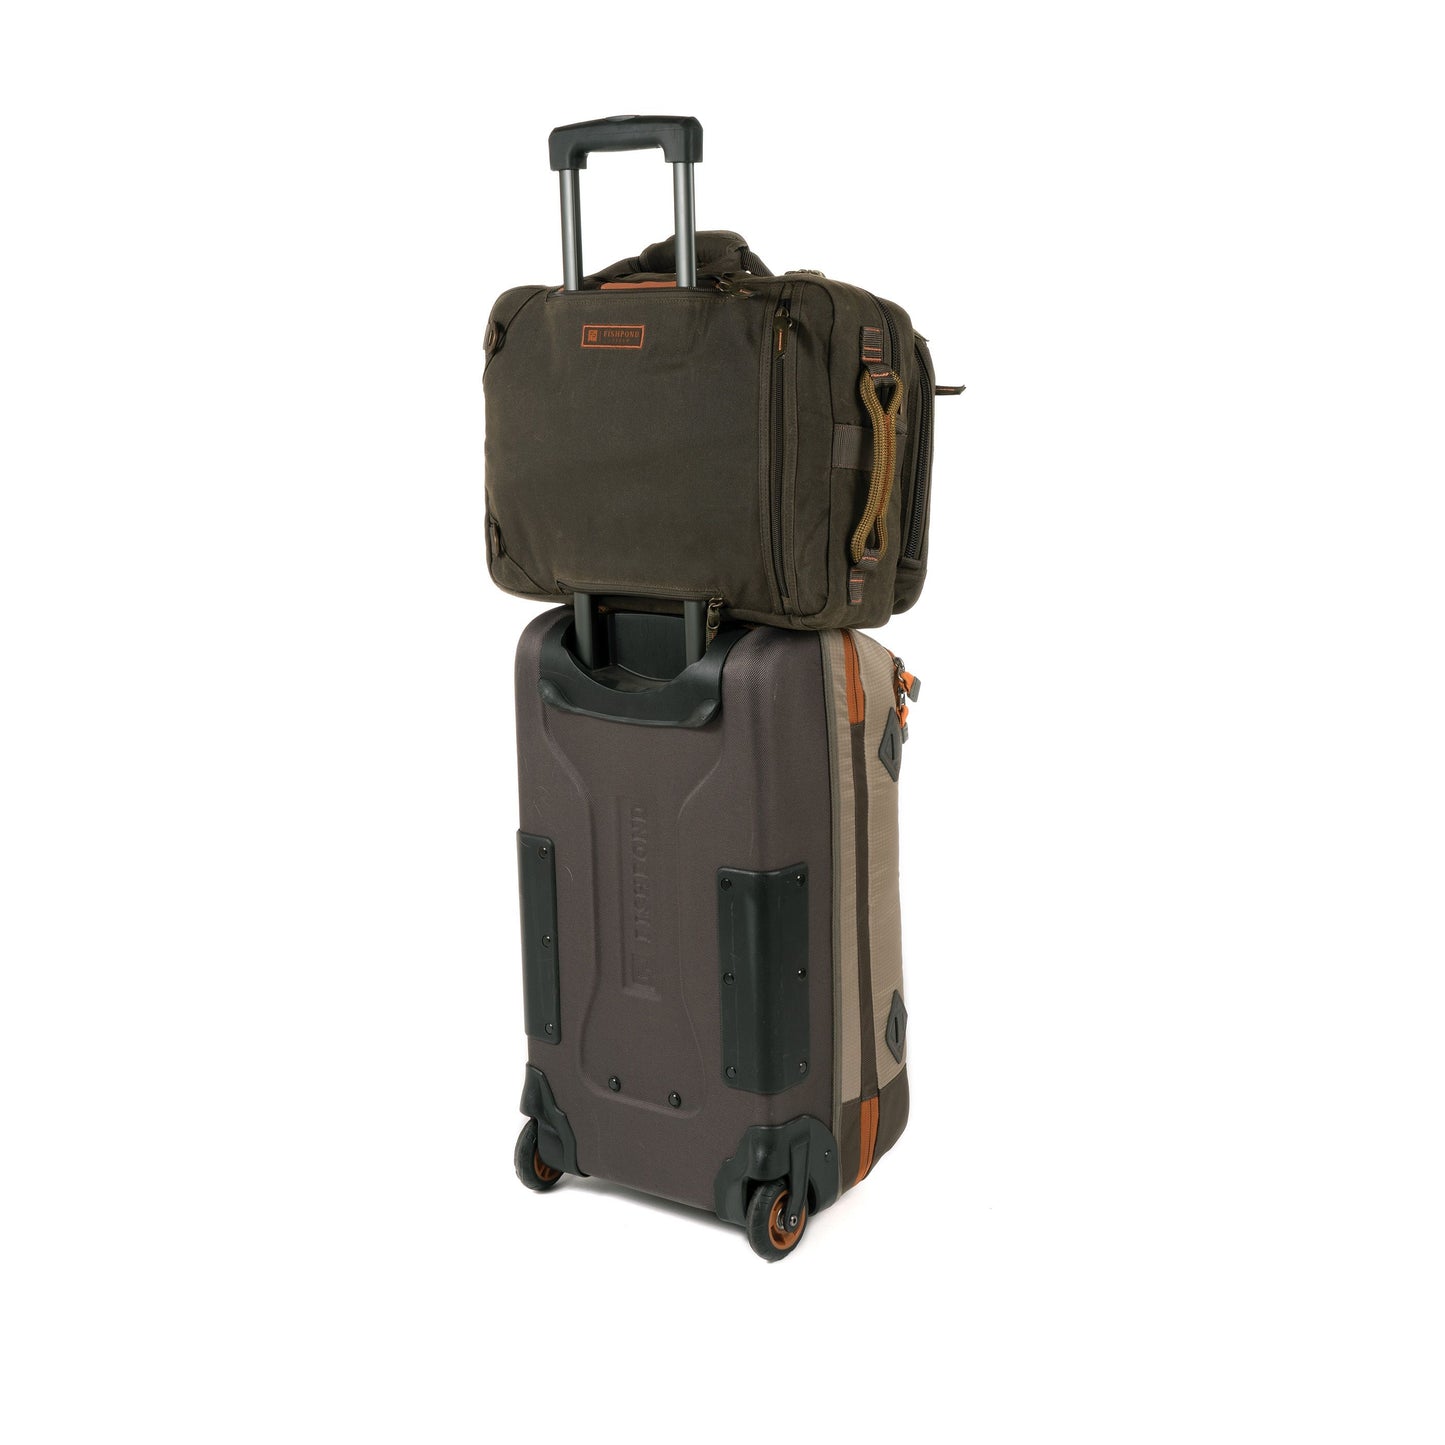 Peat Moss | Peat Moss Boulder Briefcase Luggage